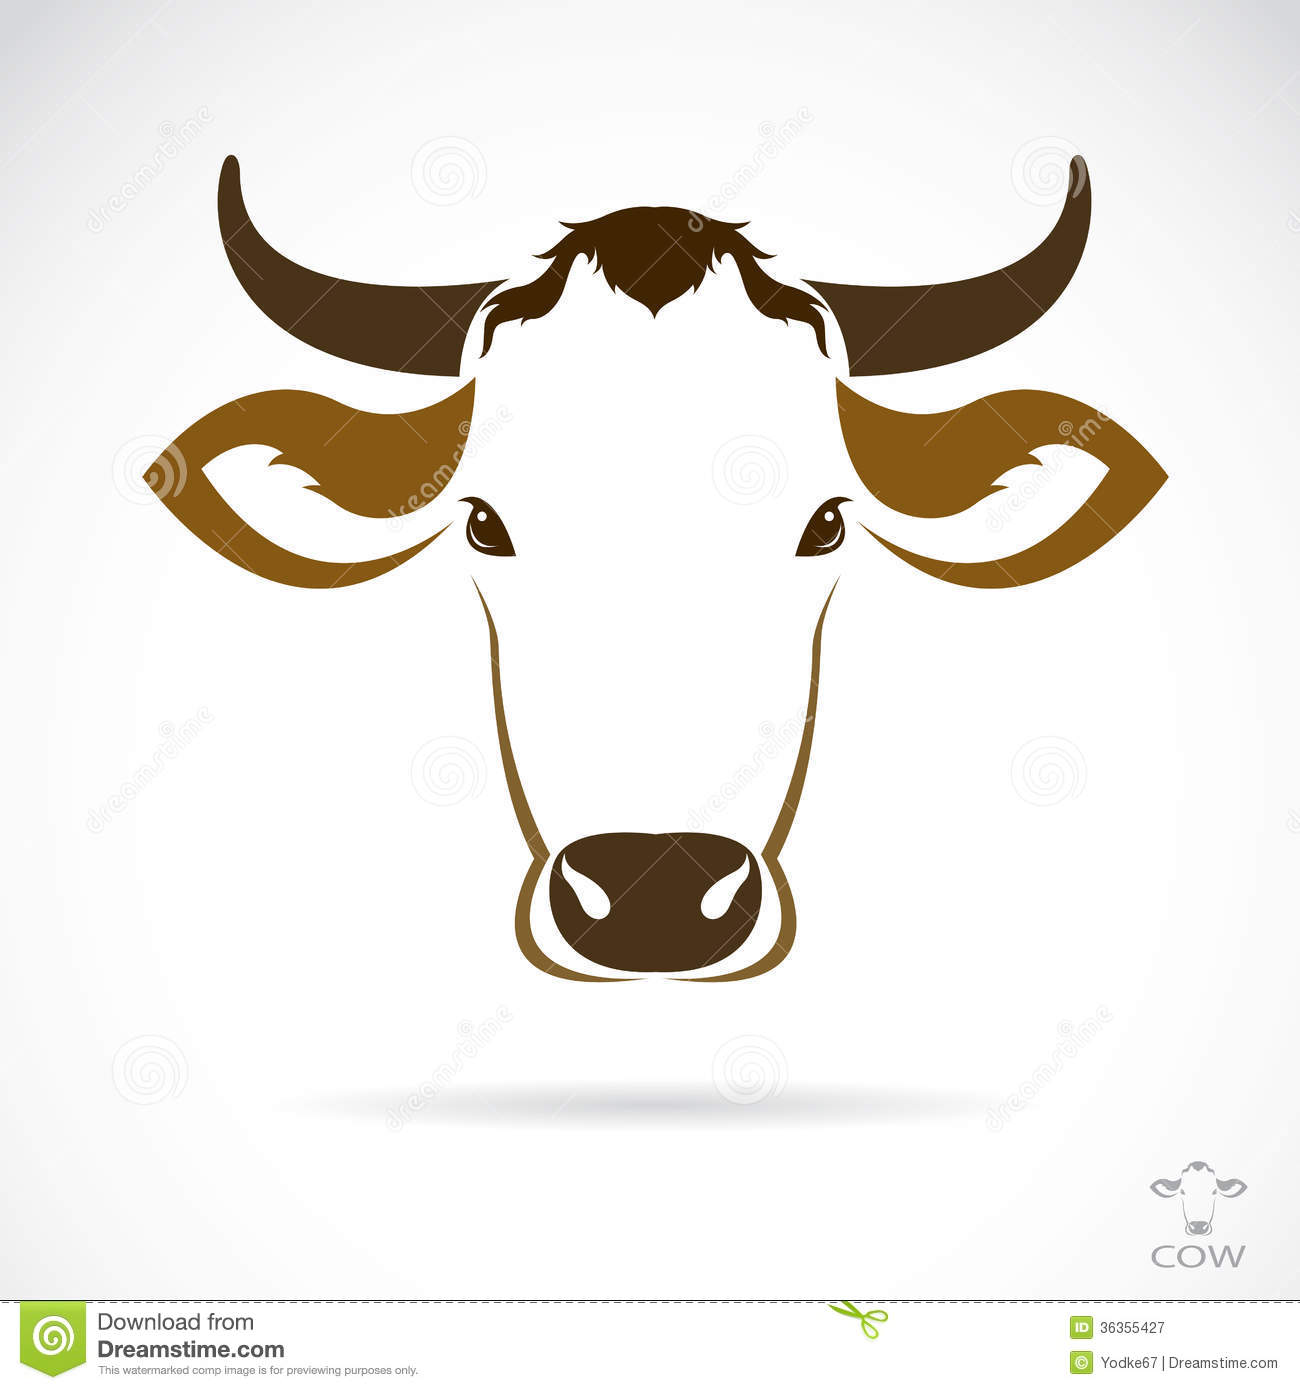 Vector Image Of An Cow Head Royalty Free Stock Photography   Image